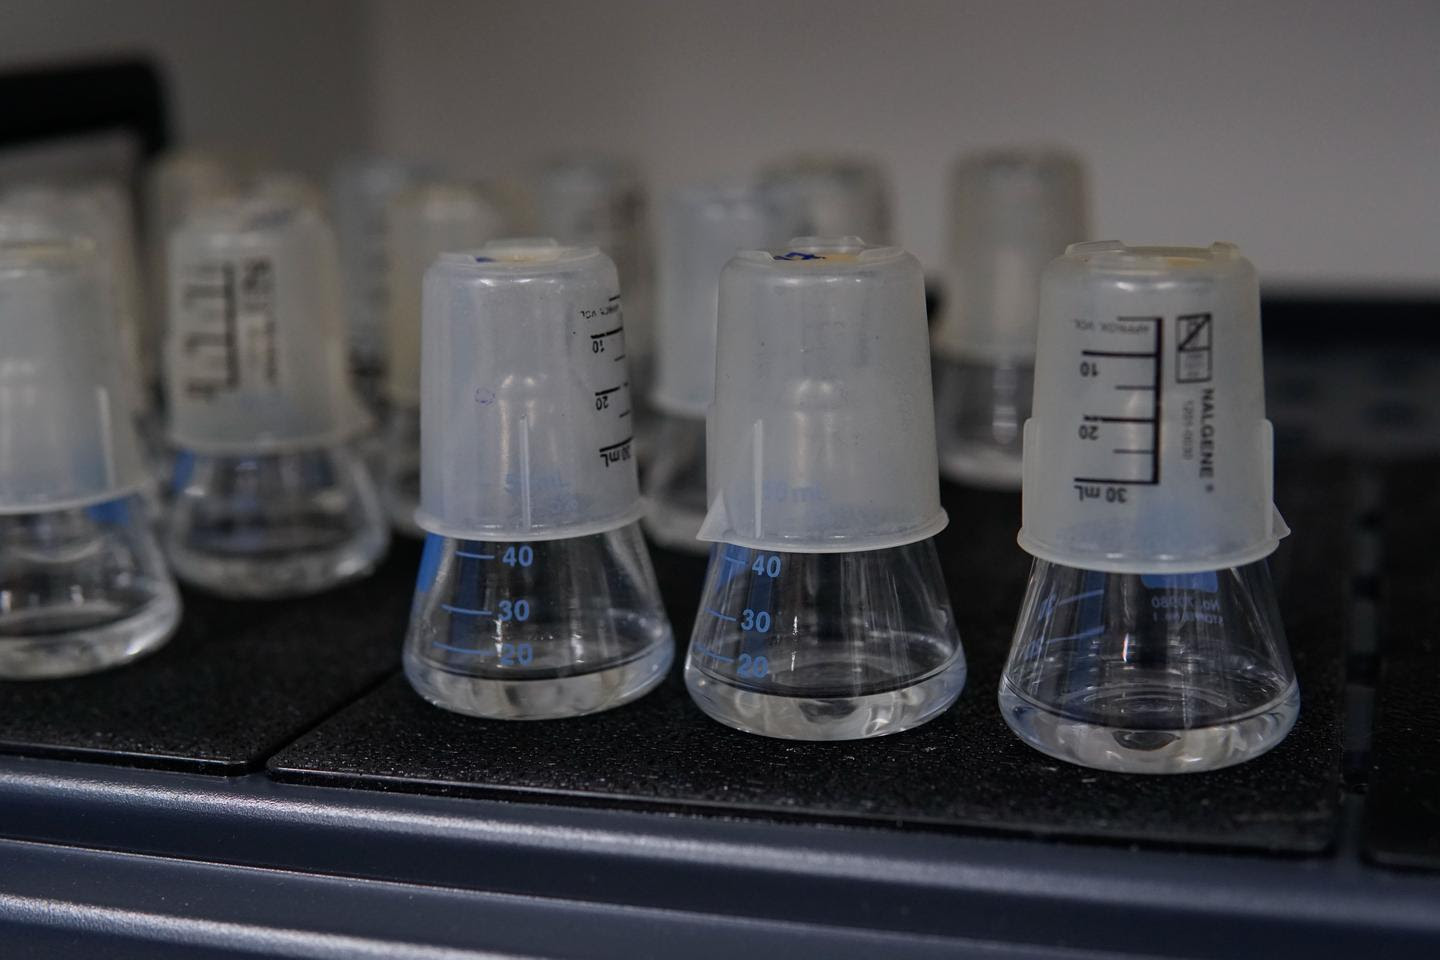 Phages, both trained and untrained, are pitted against bacteria in flasks in the lab